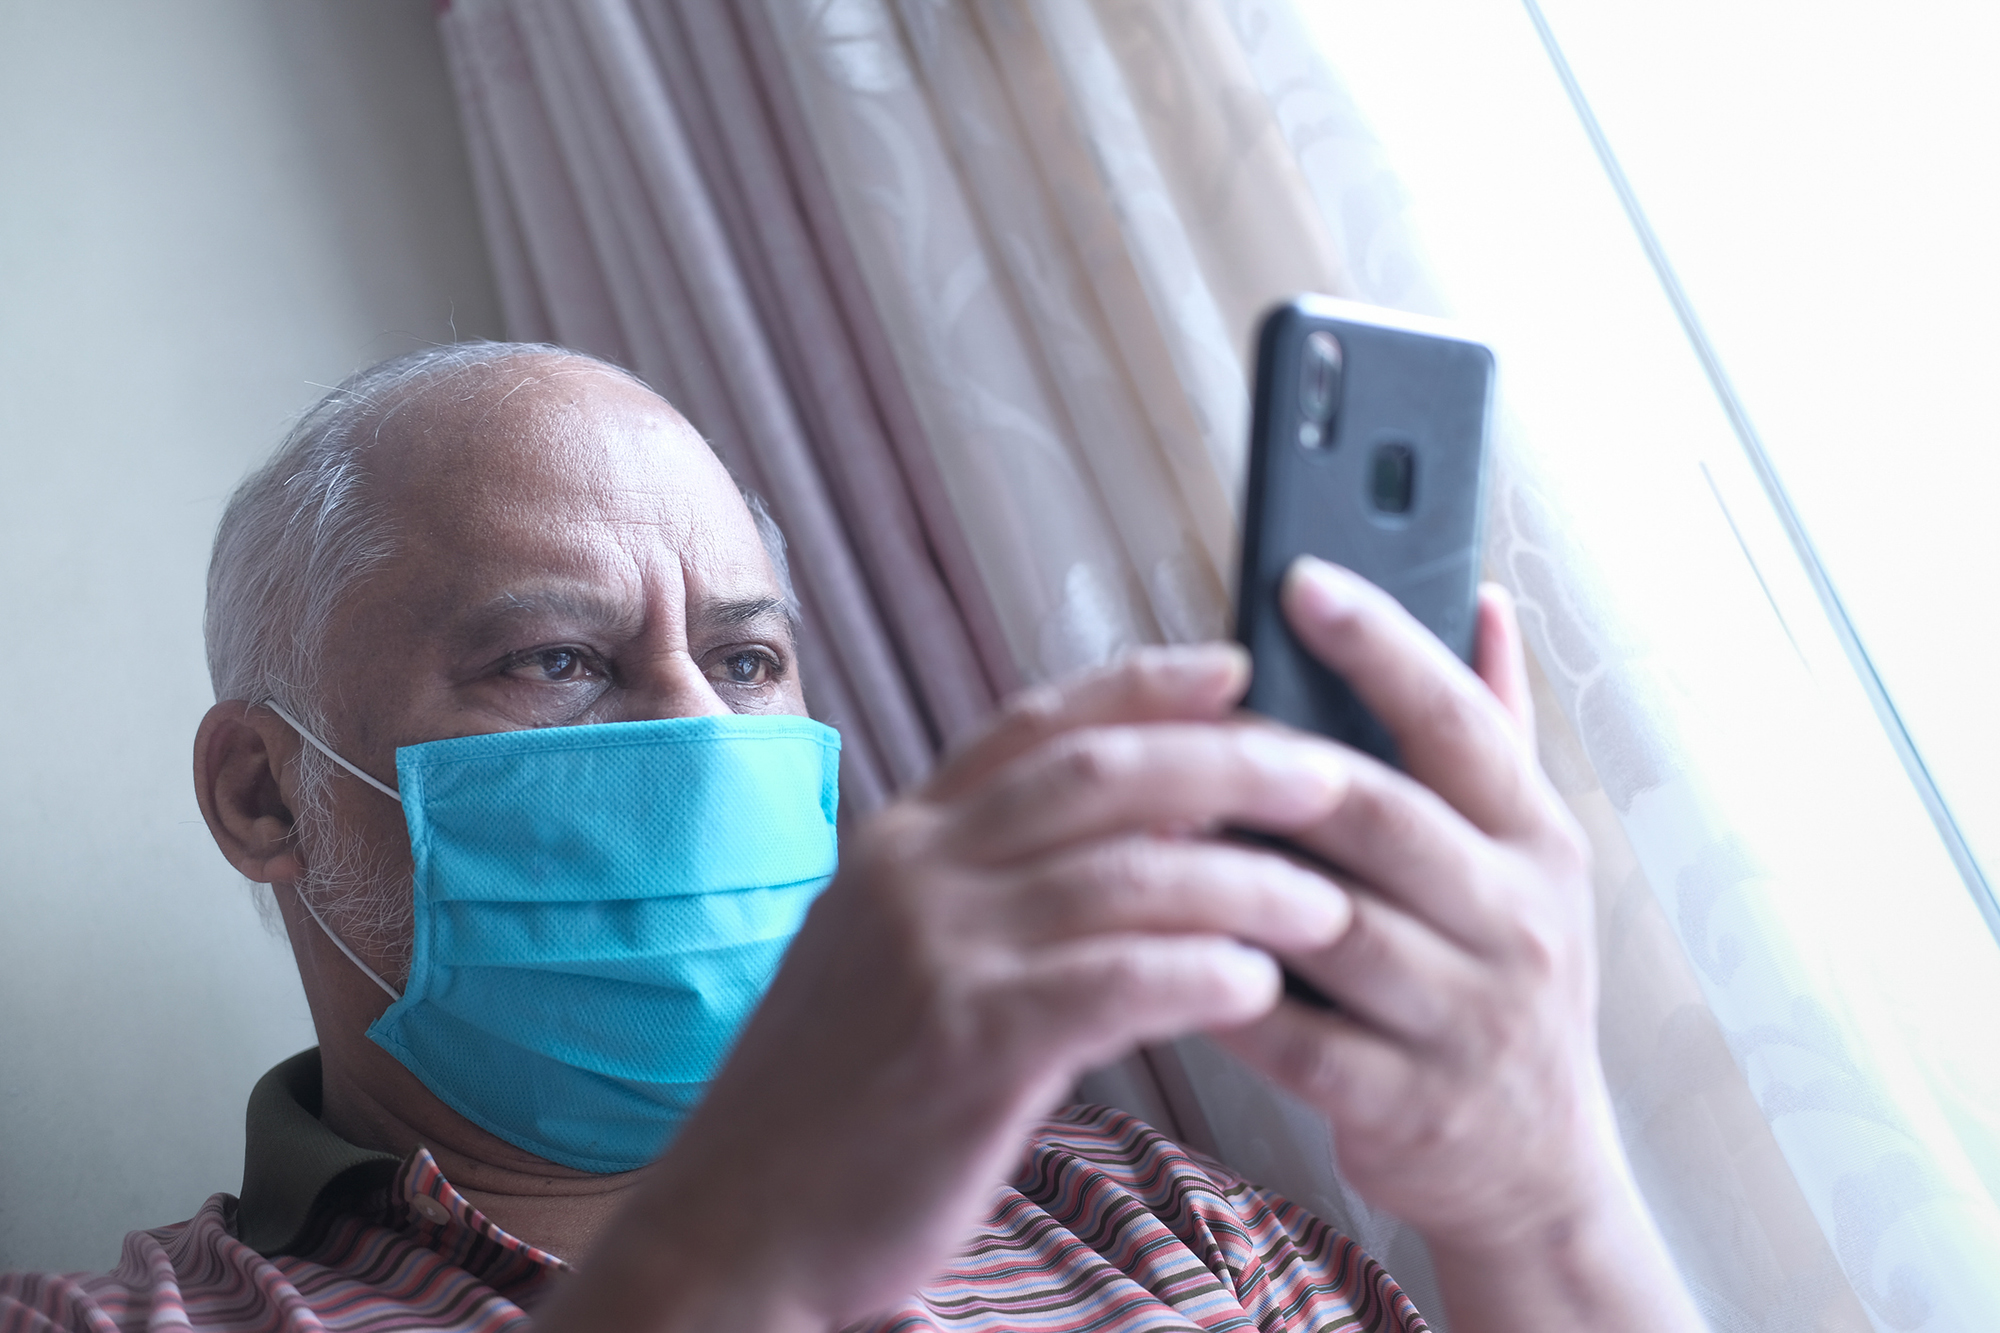 Person wearing a face mask holds up a smartphone, reading a text message.